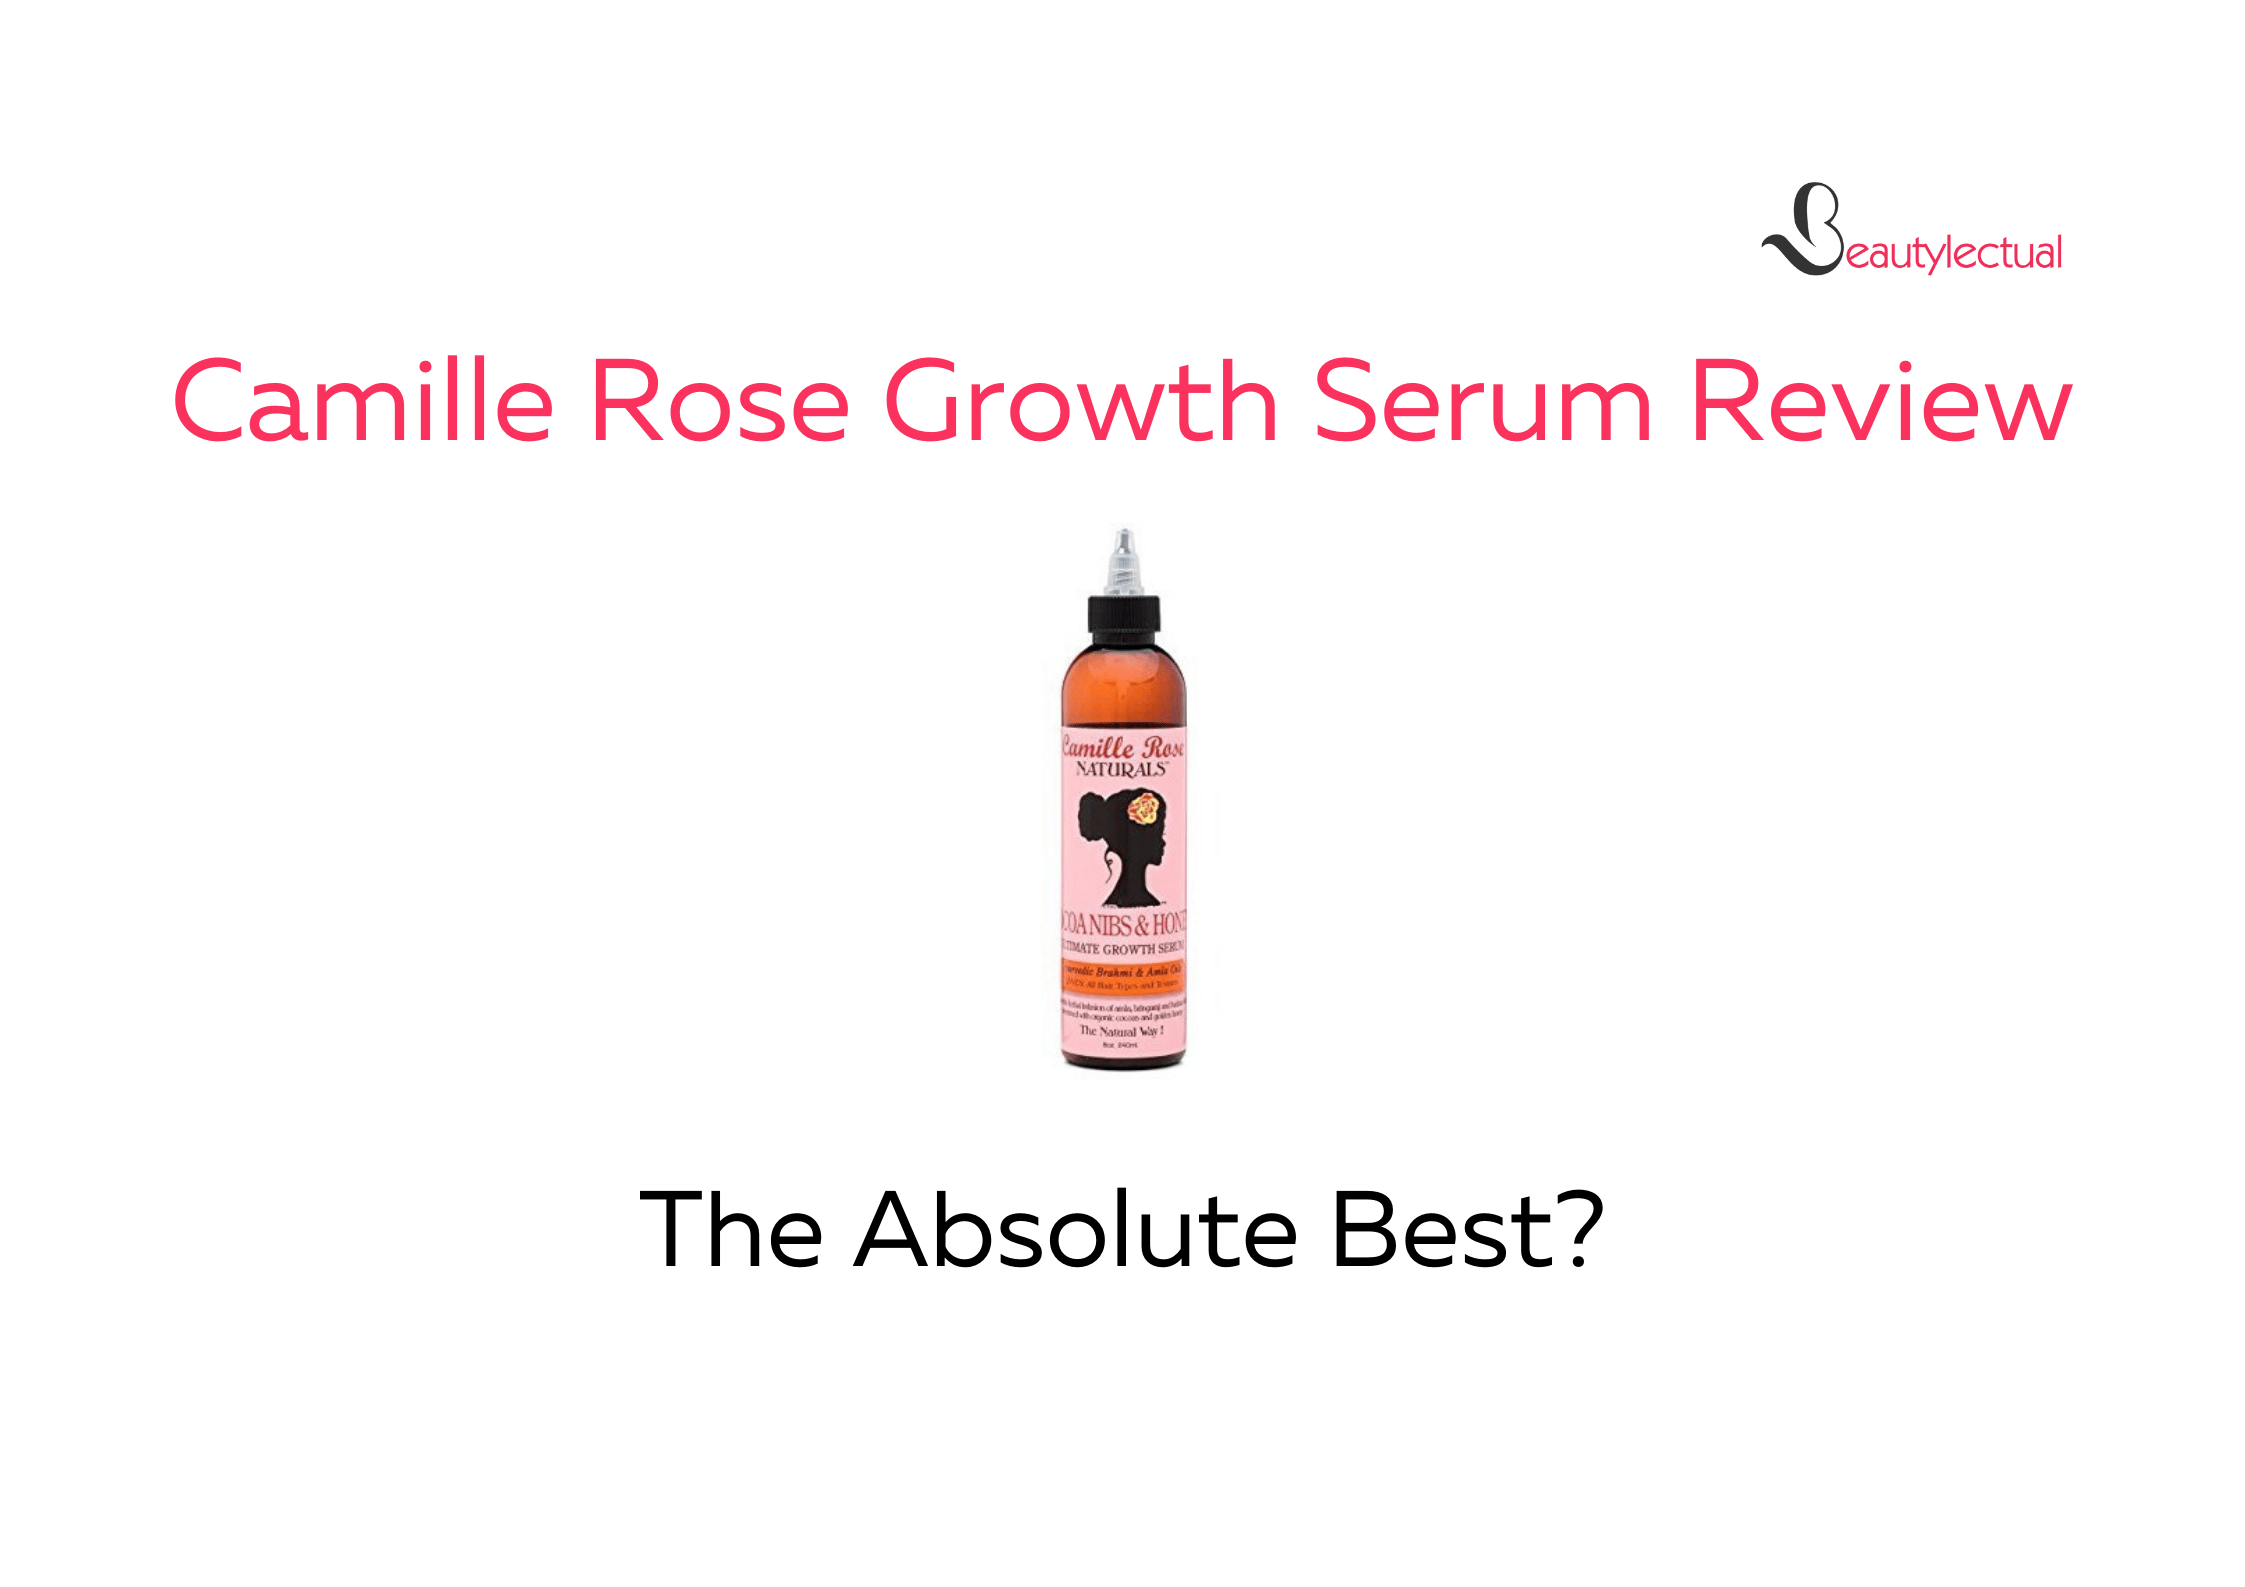 Camille Rose Growth Serum Review